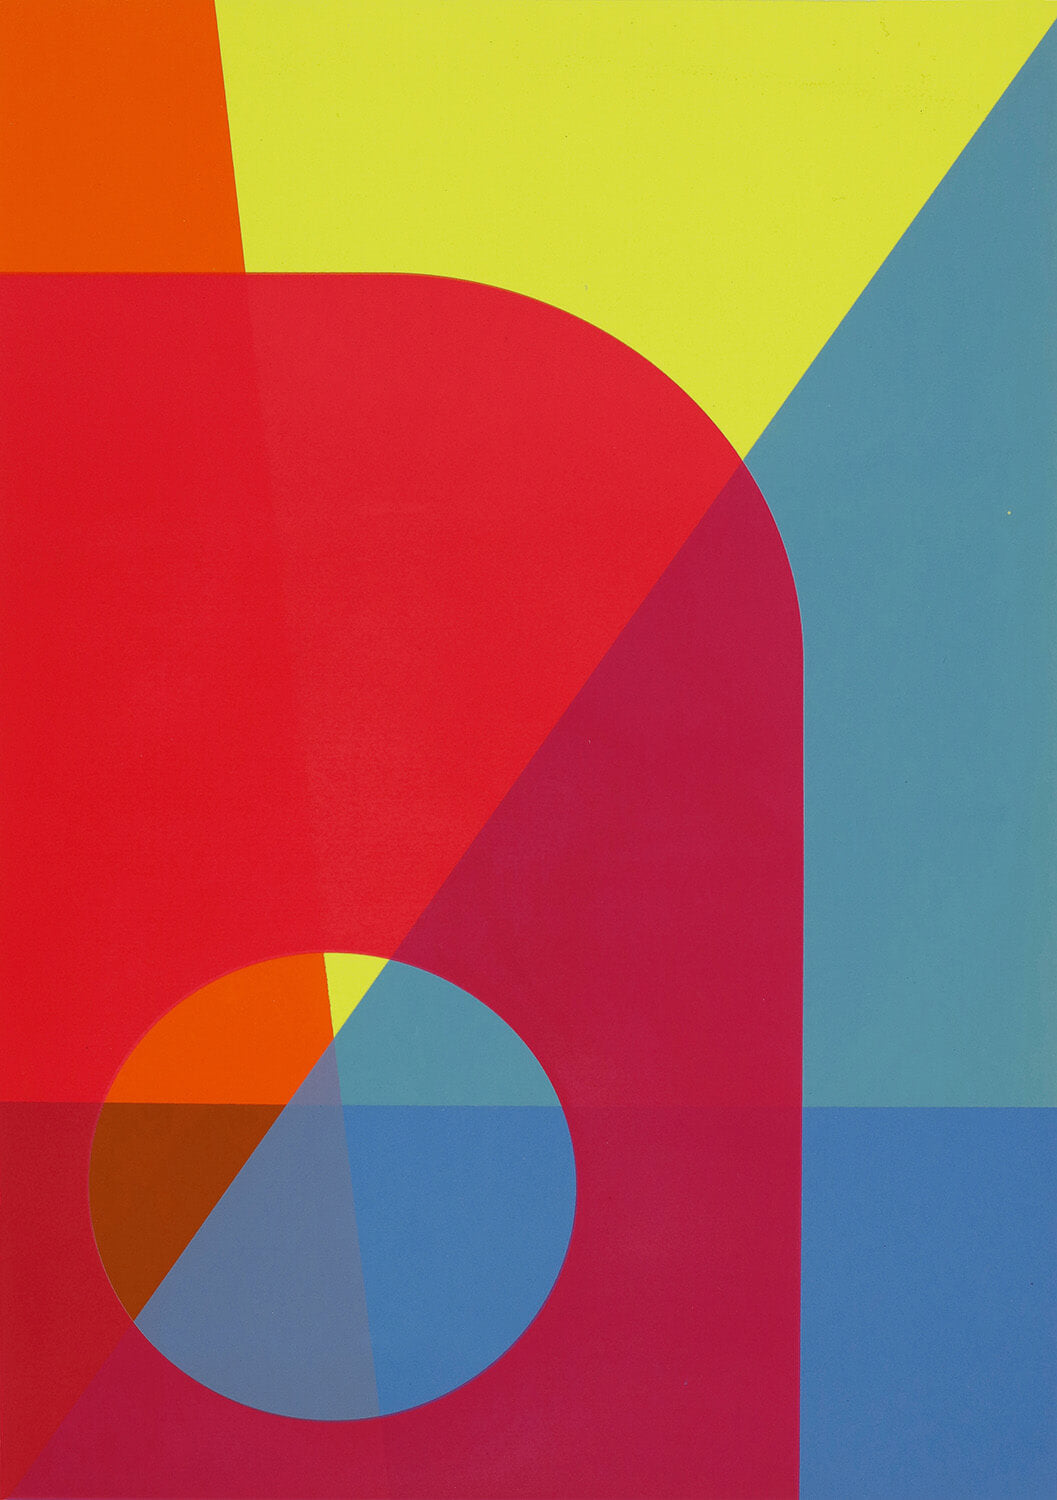 Abstract pop art screenprint in red, blue & yellow in a limited edition by Josie Blue Molloy